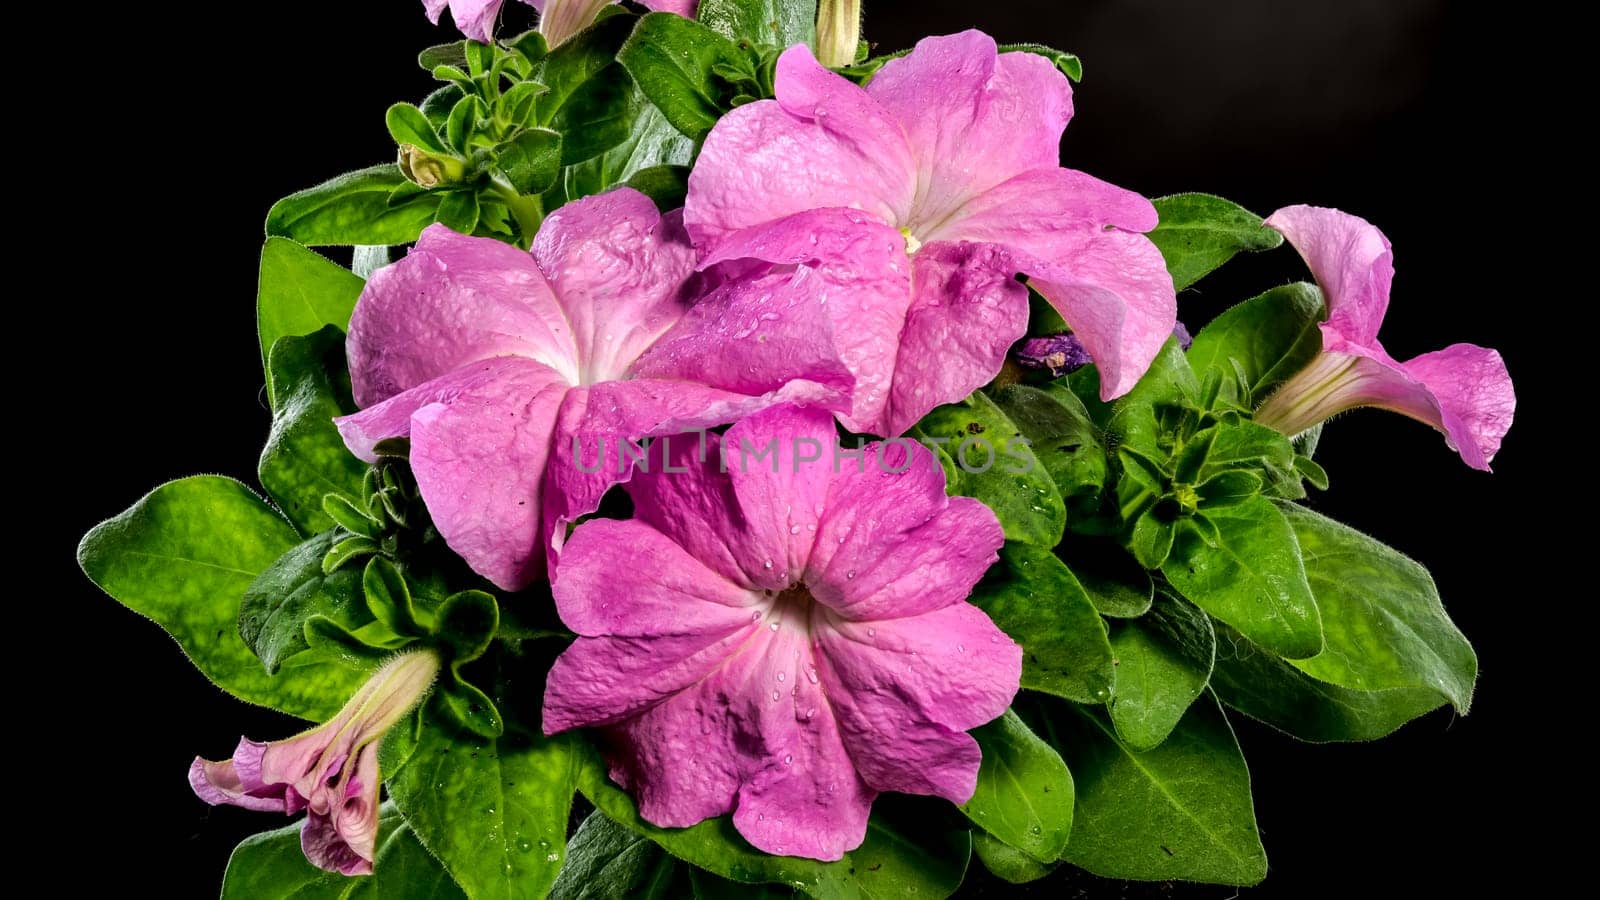 Blooming violet Petunia flowers on a black background by Multipedia